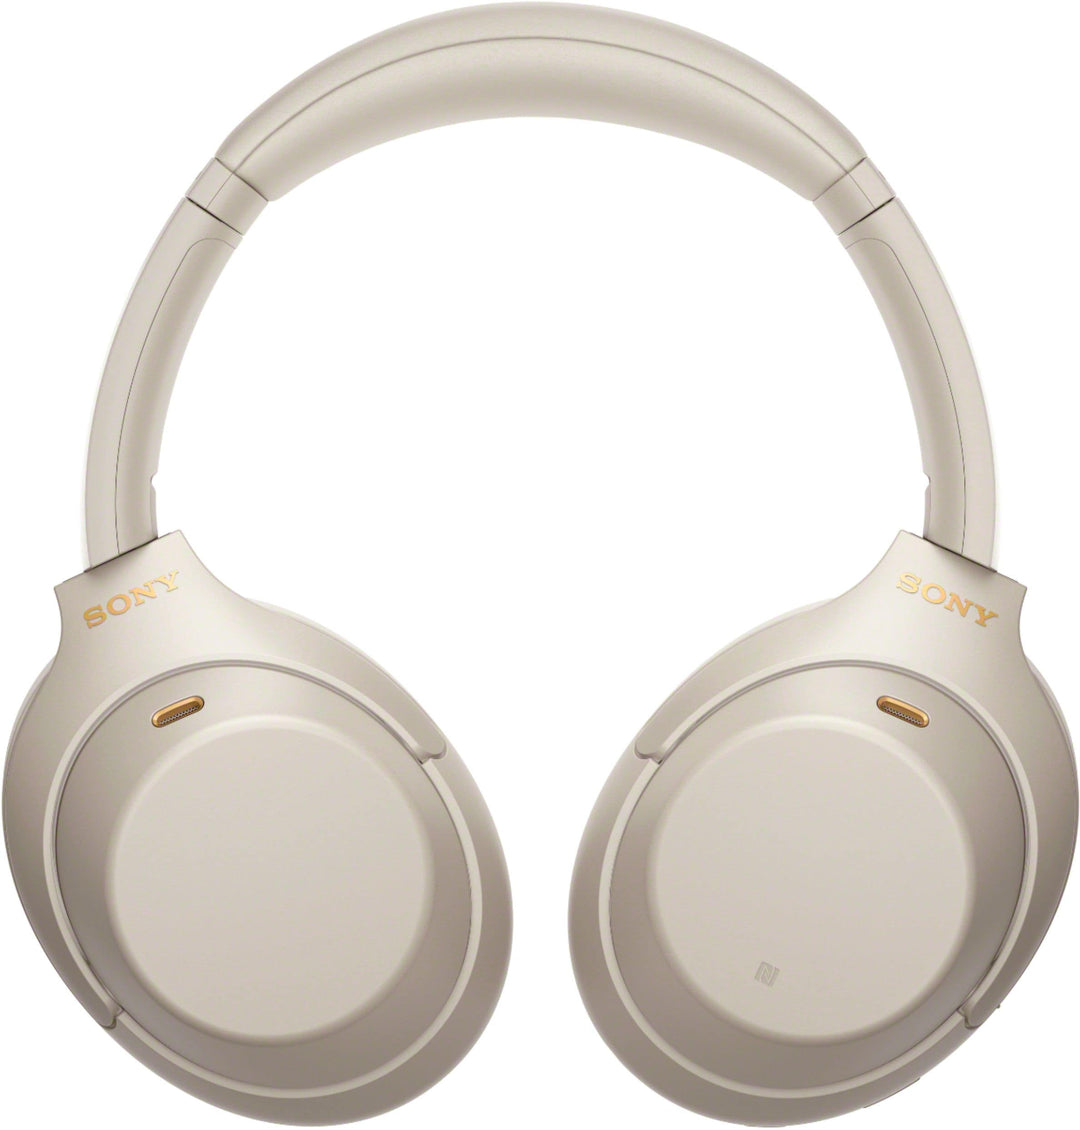 Sony - WH-1000XM4 Wireless Noise-Cancelling Over-the-Ear Headphones - Silver_2